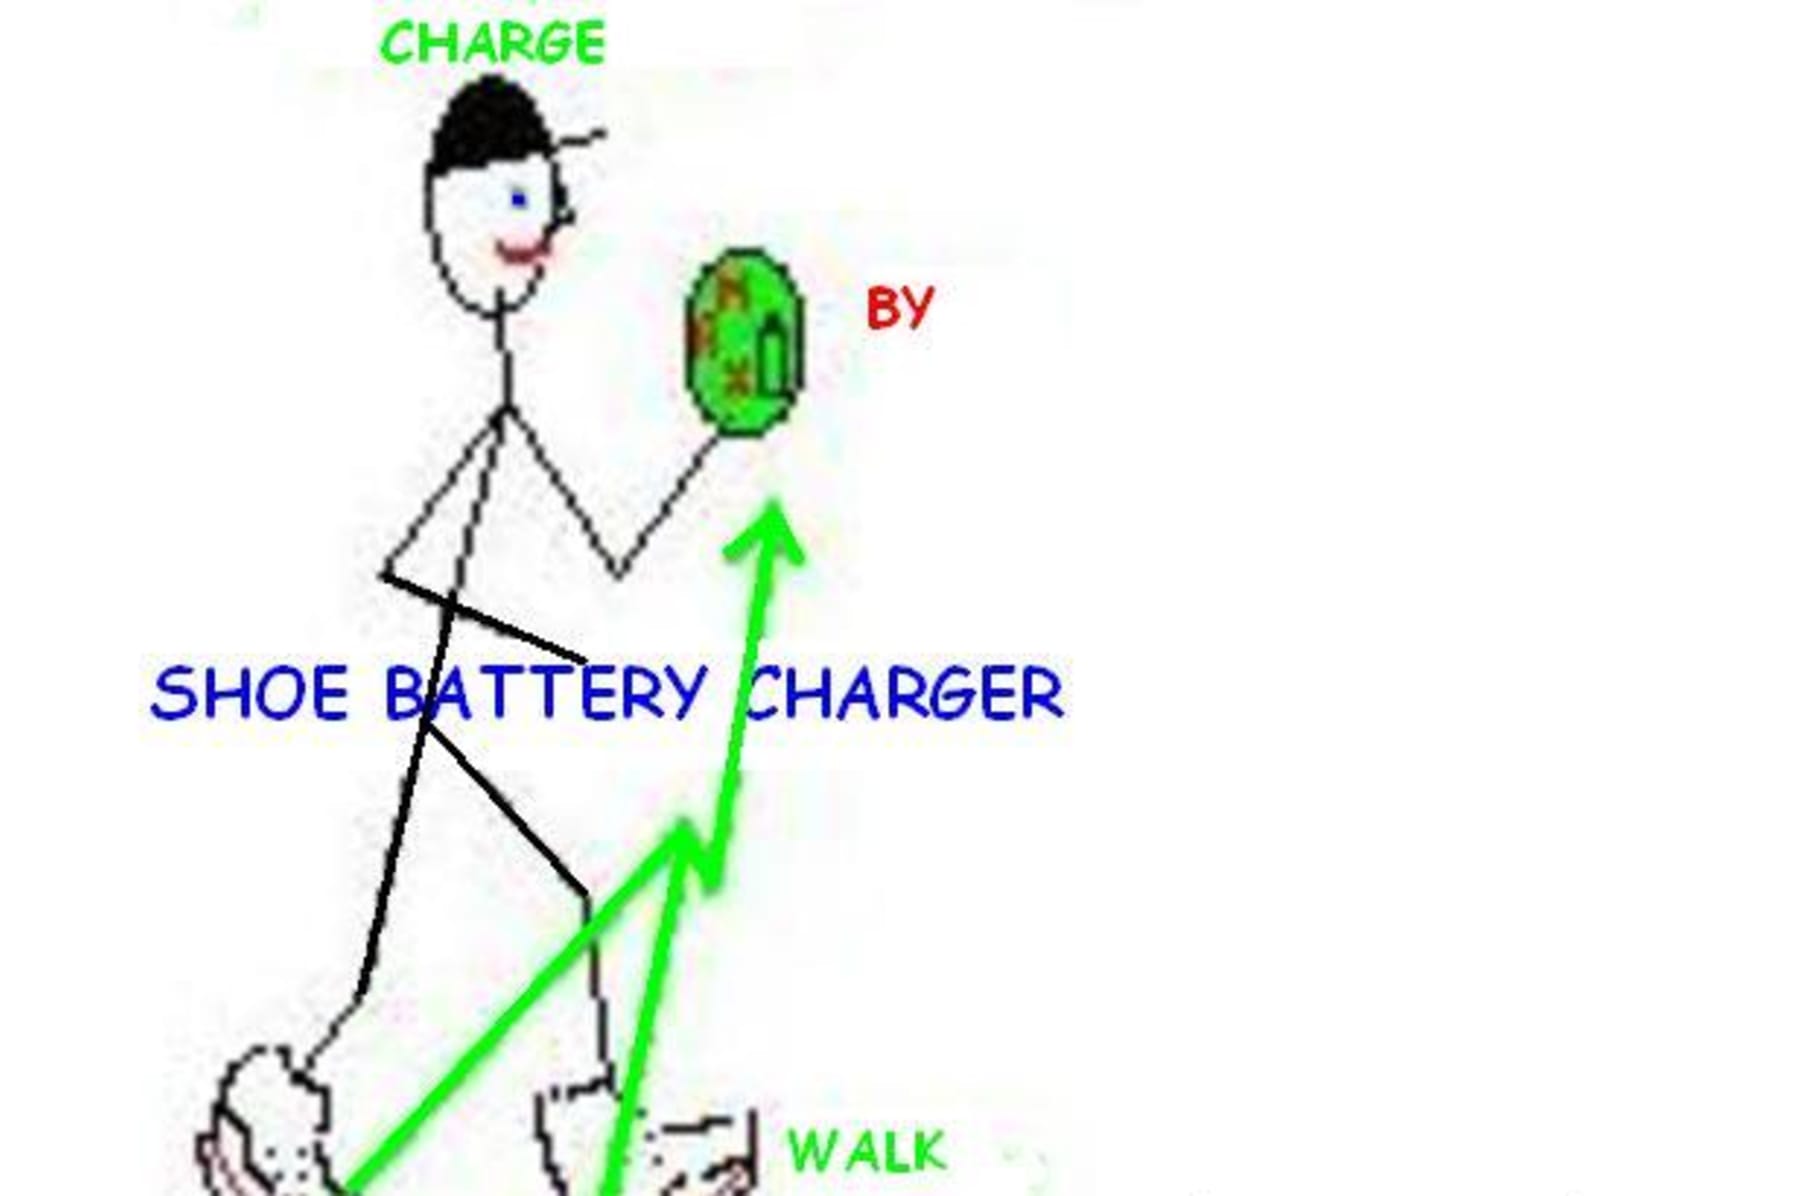 Shoe Battery Charger Electricity generated by walk | Indiegogo